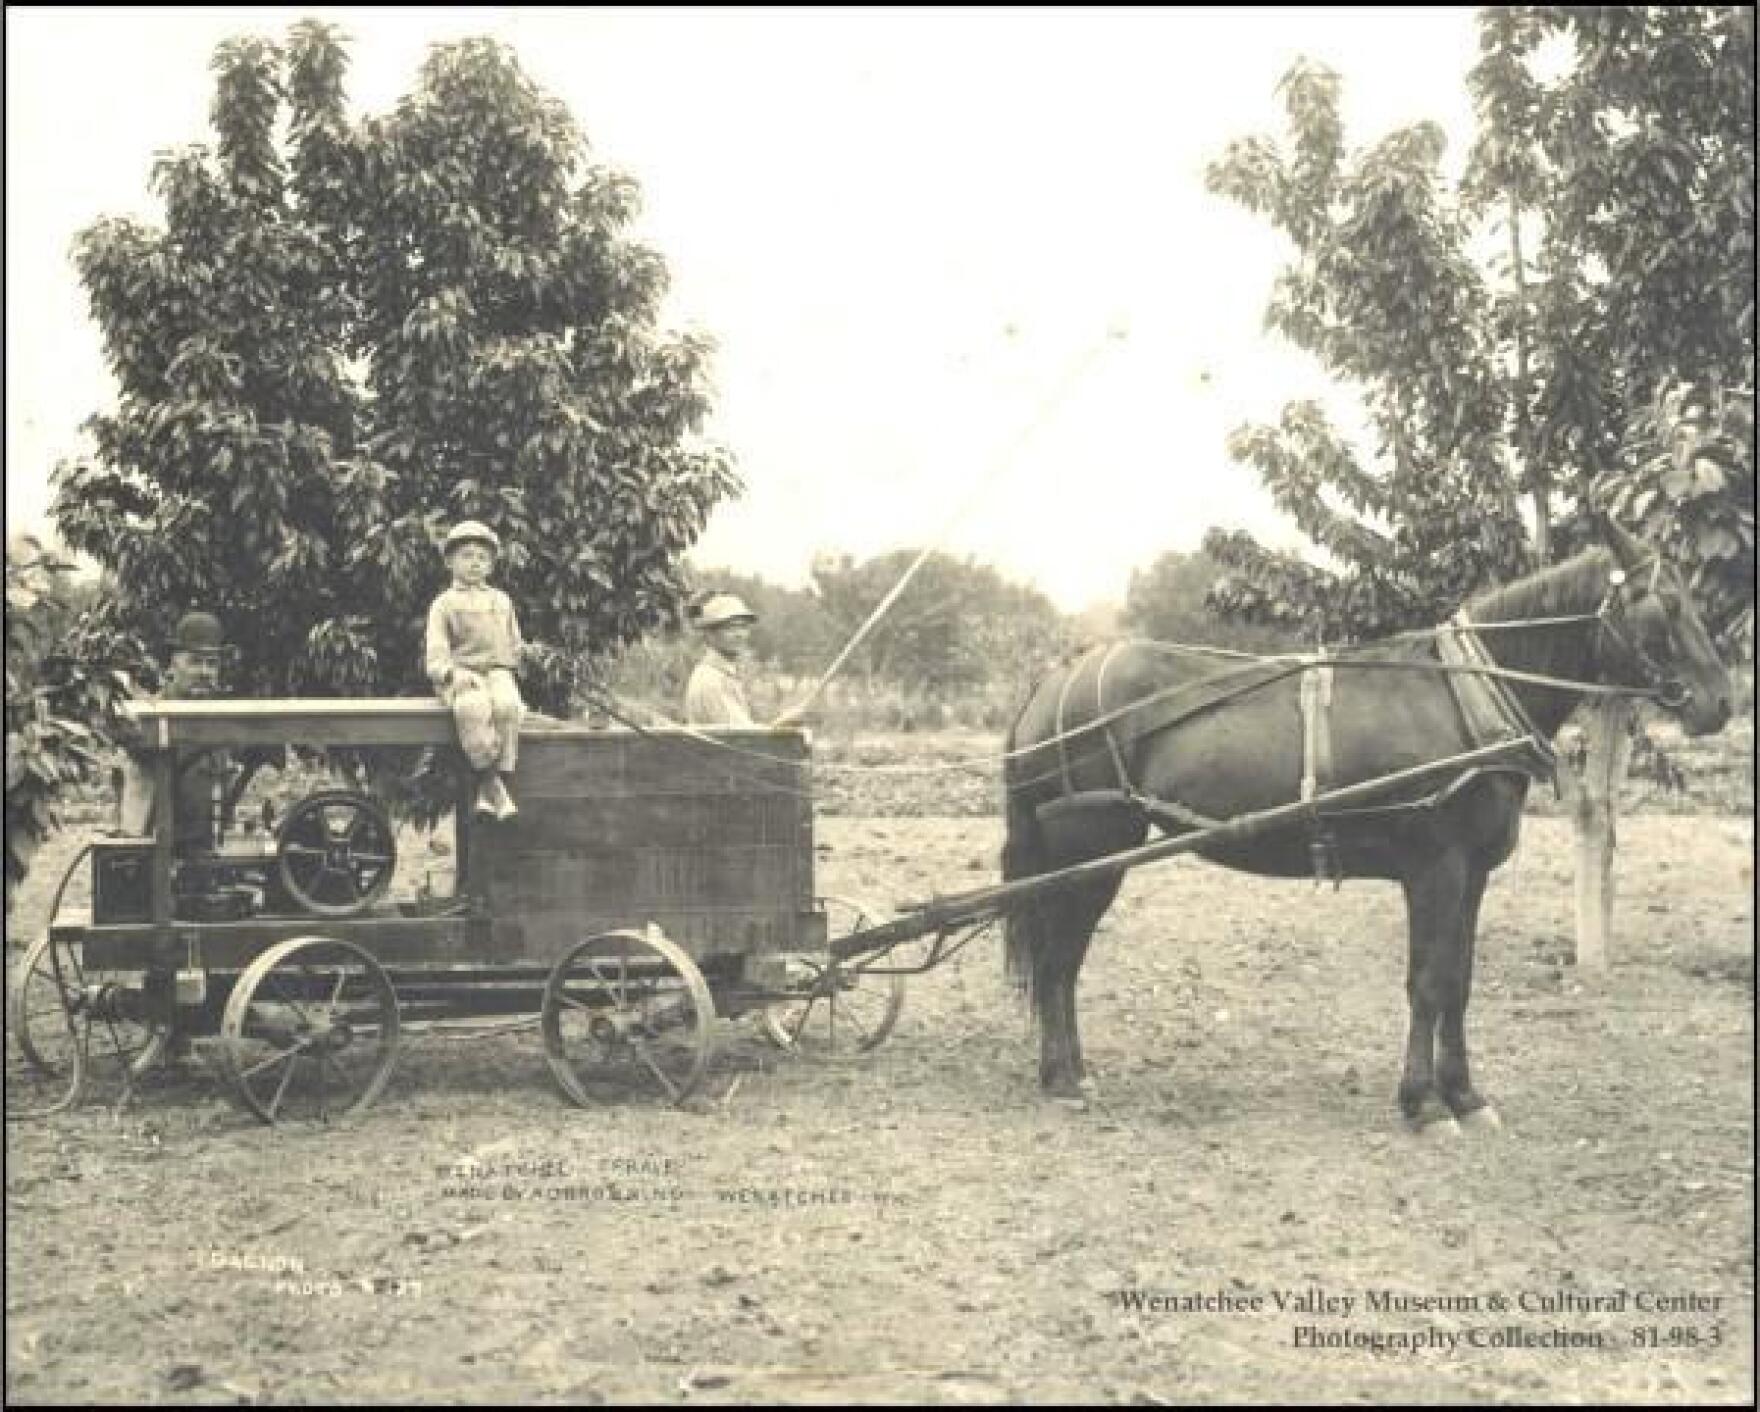 A Wenatchee sprayer made by A. D. Browning, Wenatchee. Two men, one with bamboo spray pole, and one small boy sitting on top of sprayer pulled by one horse in a fruit orchard in Wenatchee.